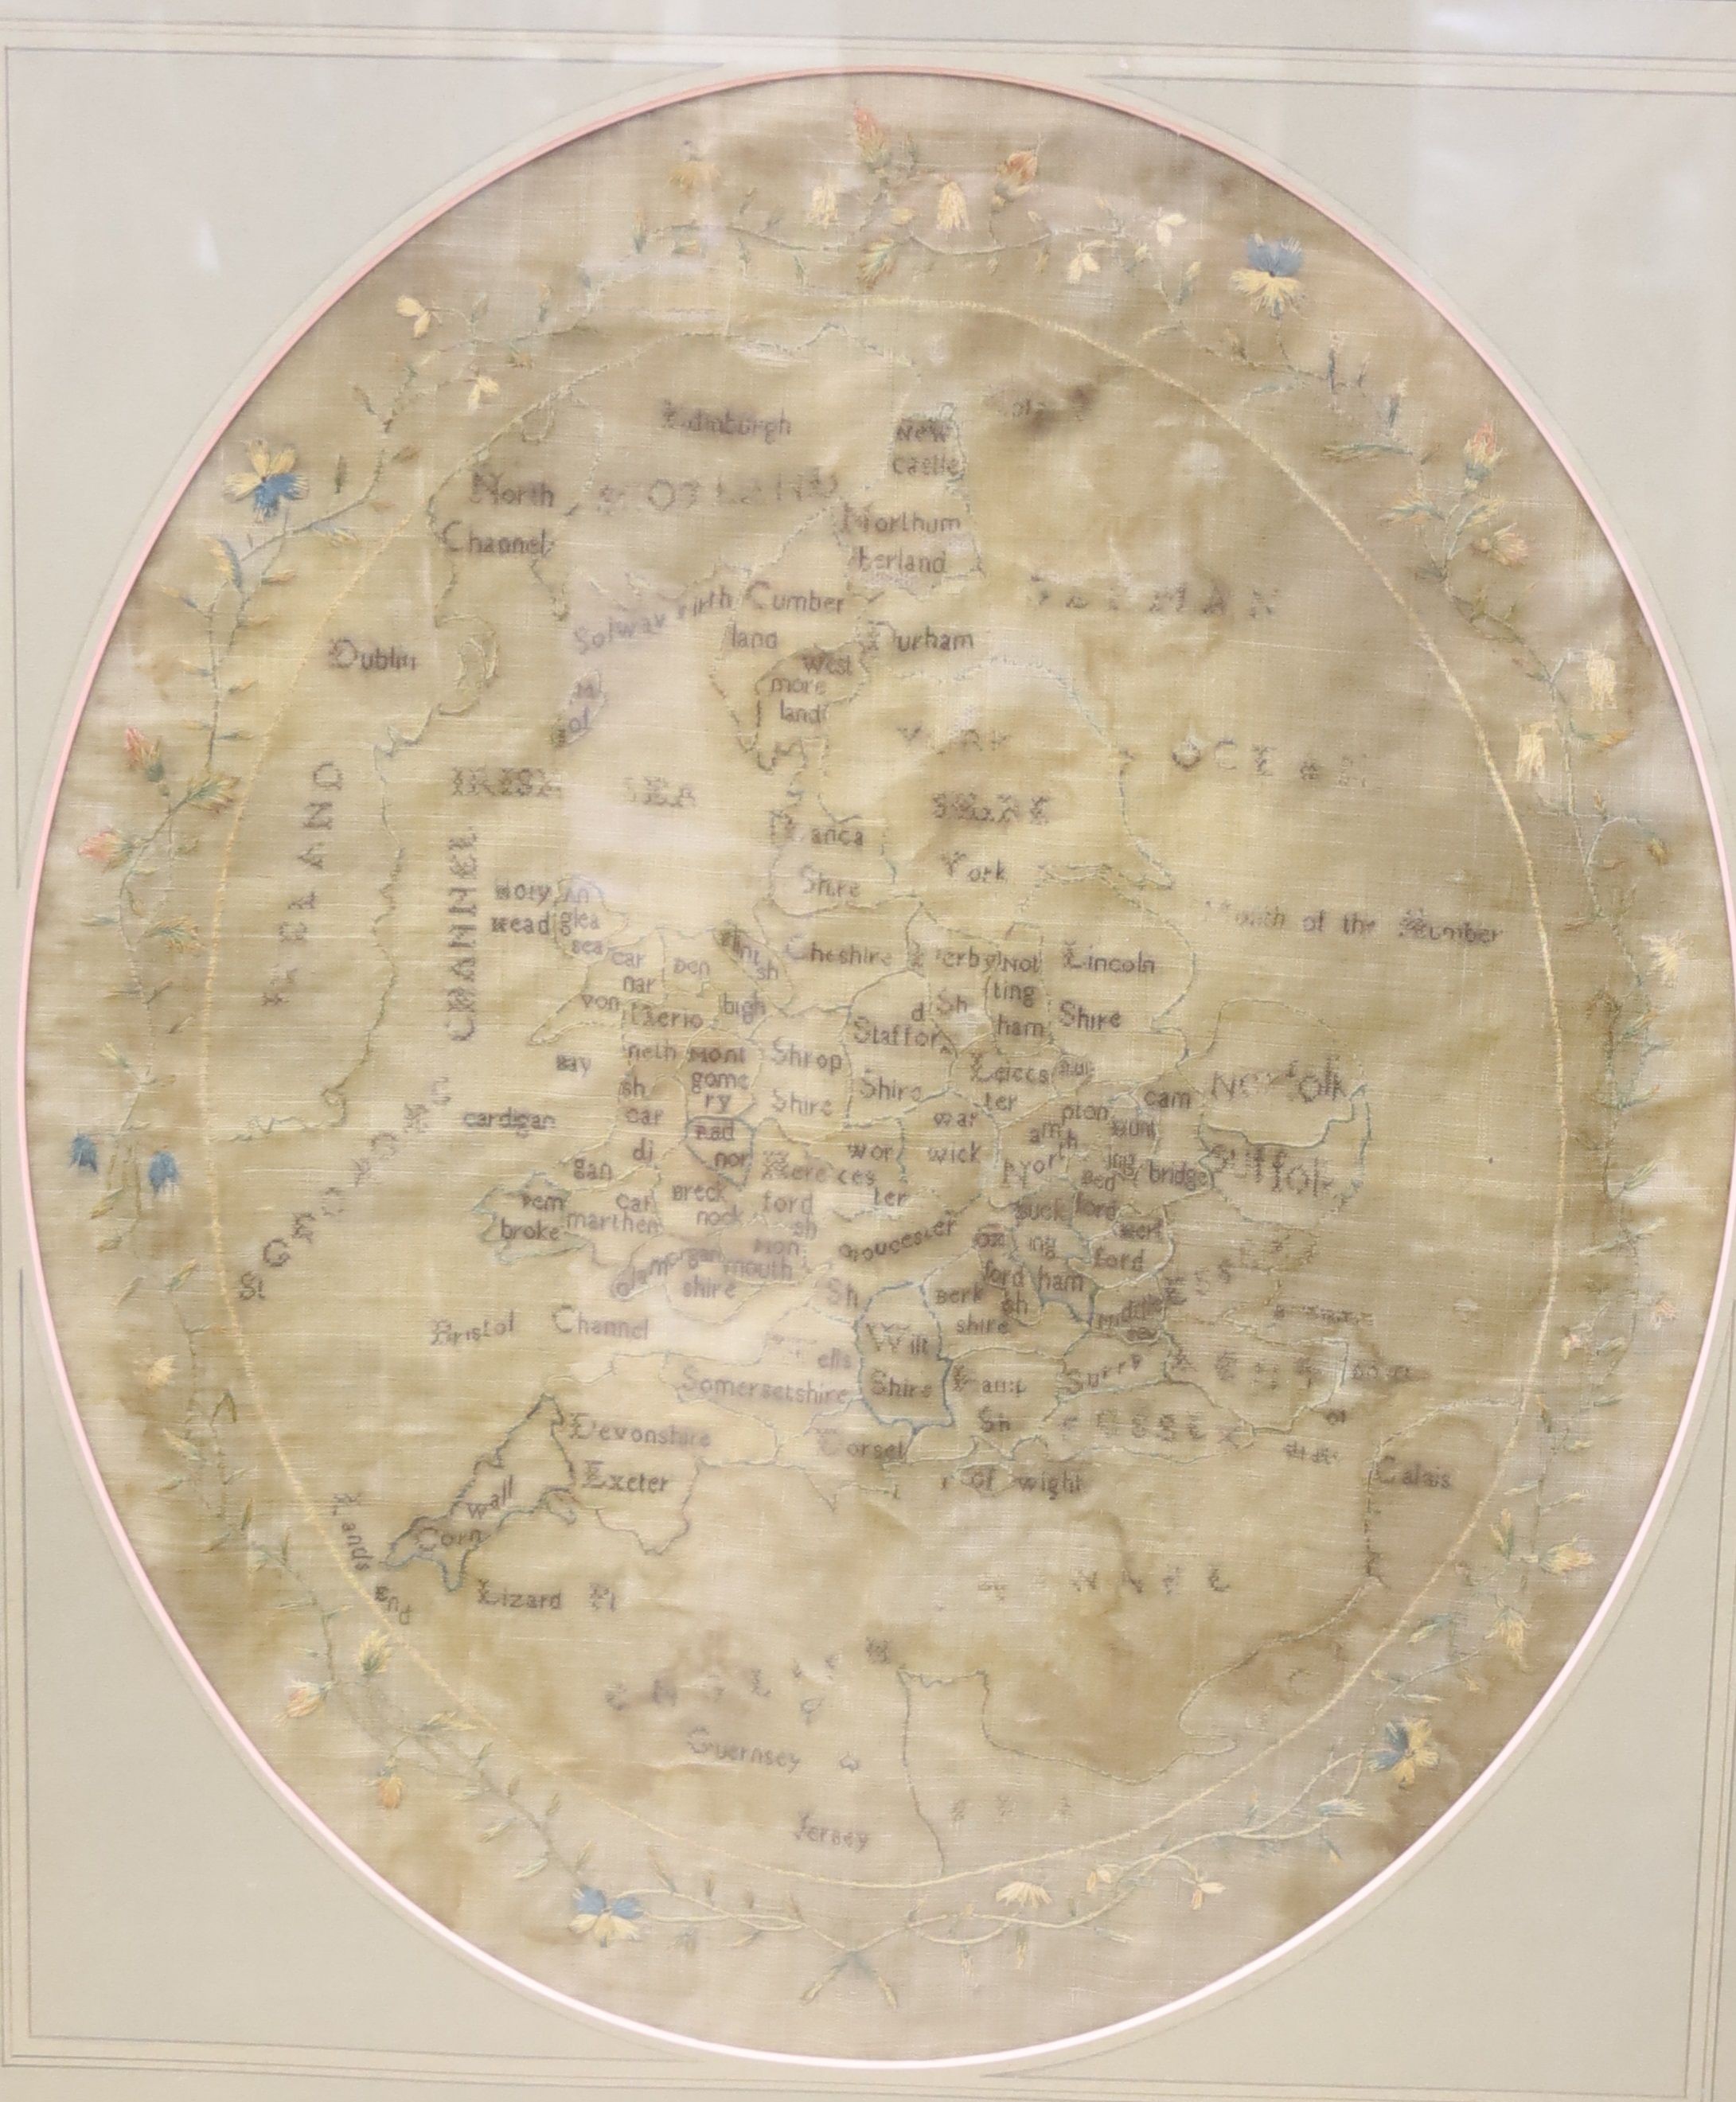 19th century embroidered map sampler, Britain and Wales